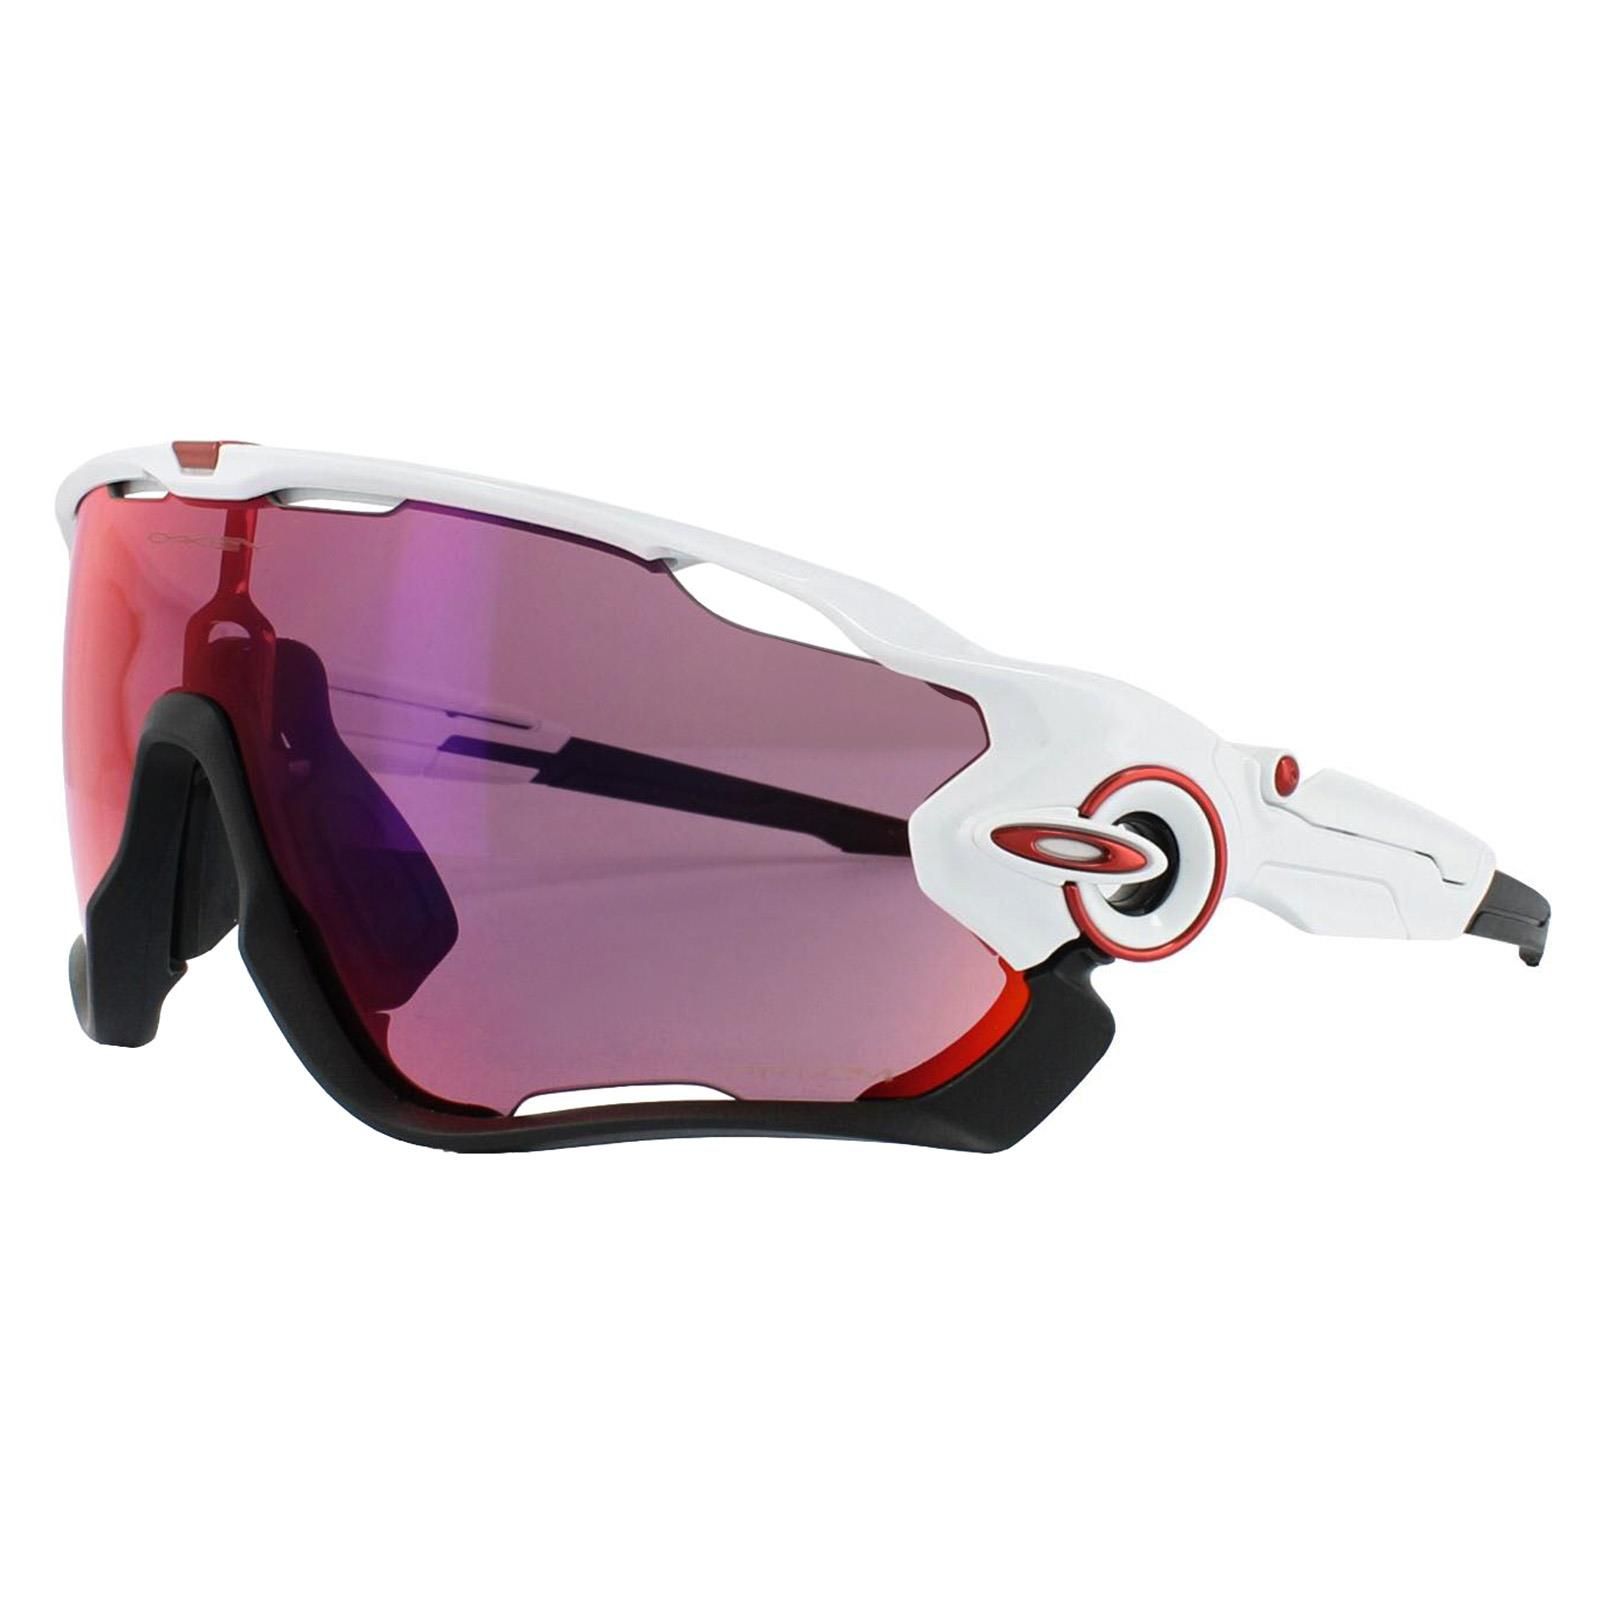 Oakley Sunglasses Jawbreaker OO9290-05 Polished White Prizm Road is the latest in cutting edge design for anyone with an enjoyment of sports. An easily opened hinge allows simple lens changing for different conditions and flexible suspension allows the lens to move with the frame rather than being distorted in any way. An interchangeable nosepiece completes this superb innovative frames in to the best there is.